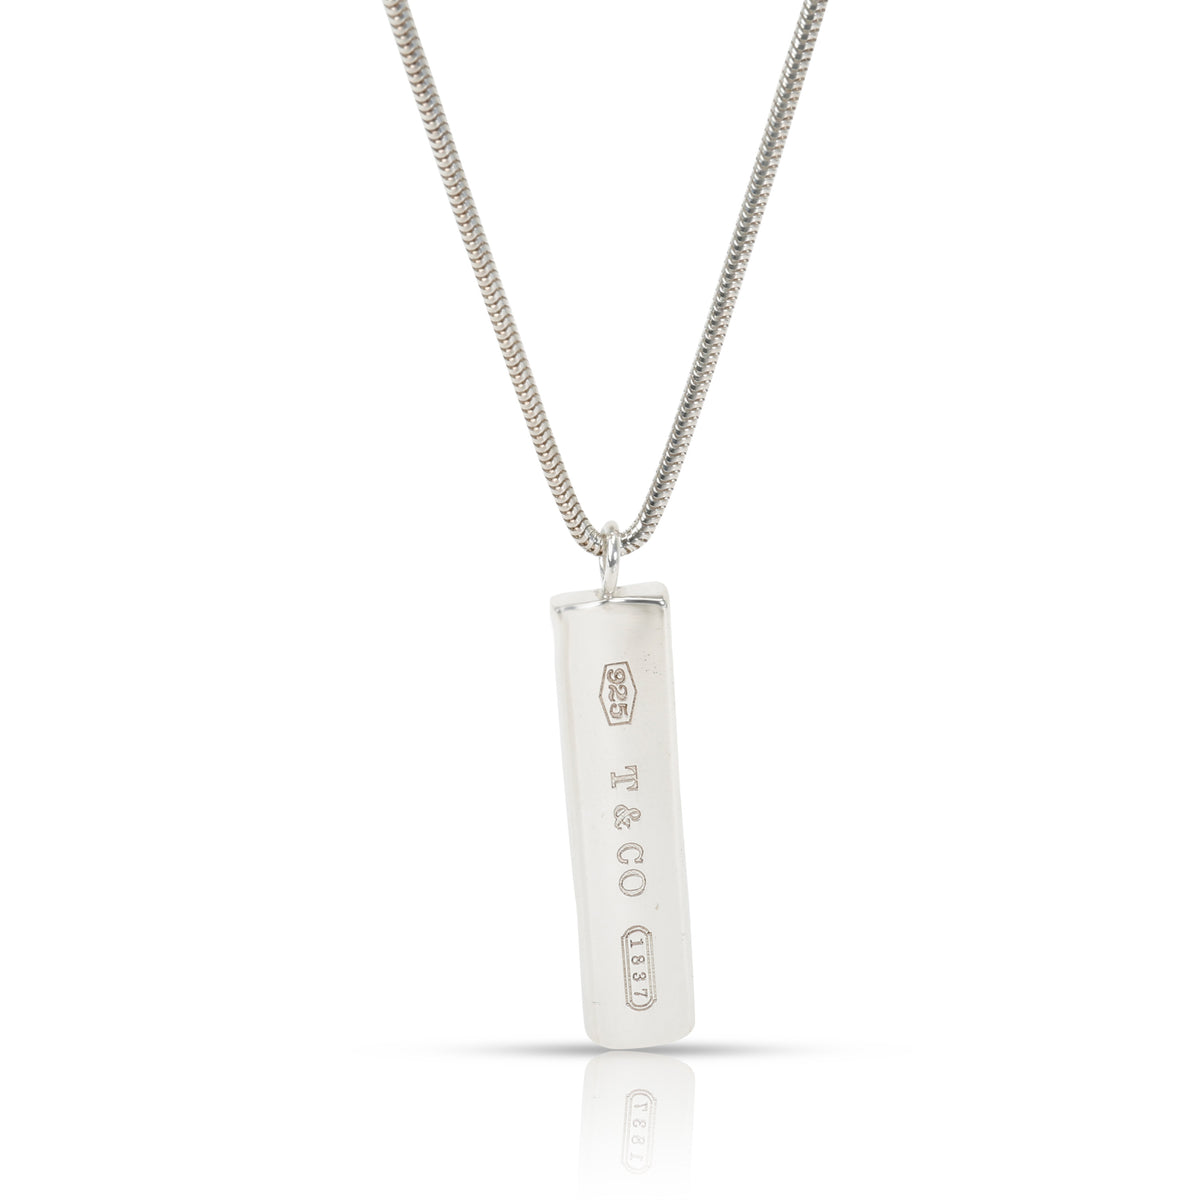 Tiffany & Co. Bar Necklace in  Sterling Silver